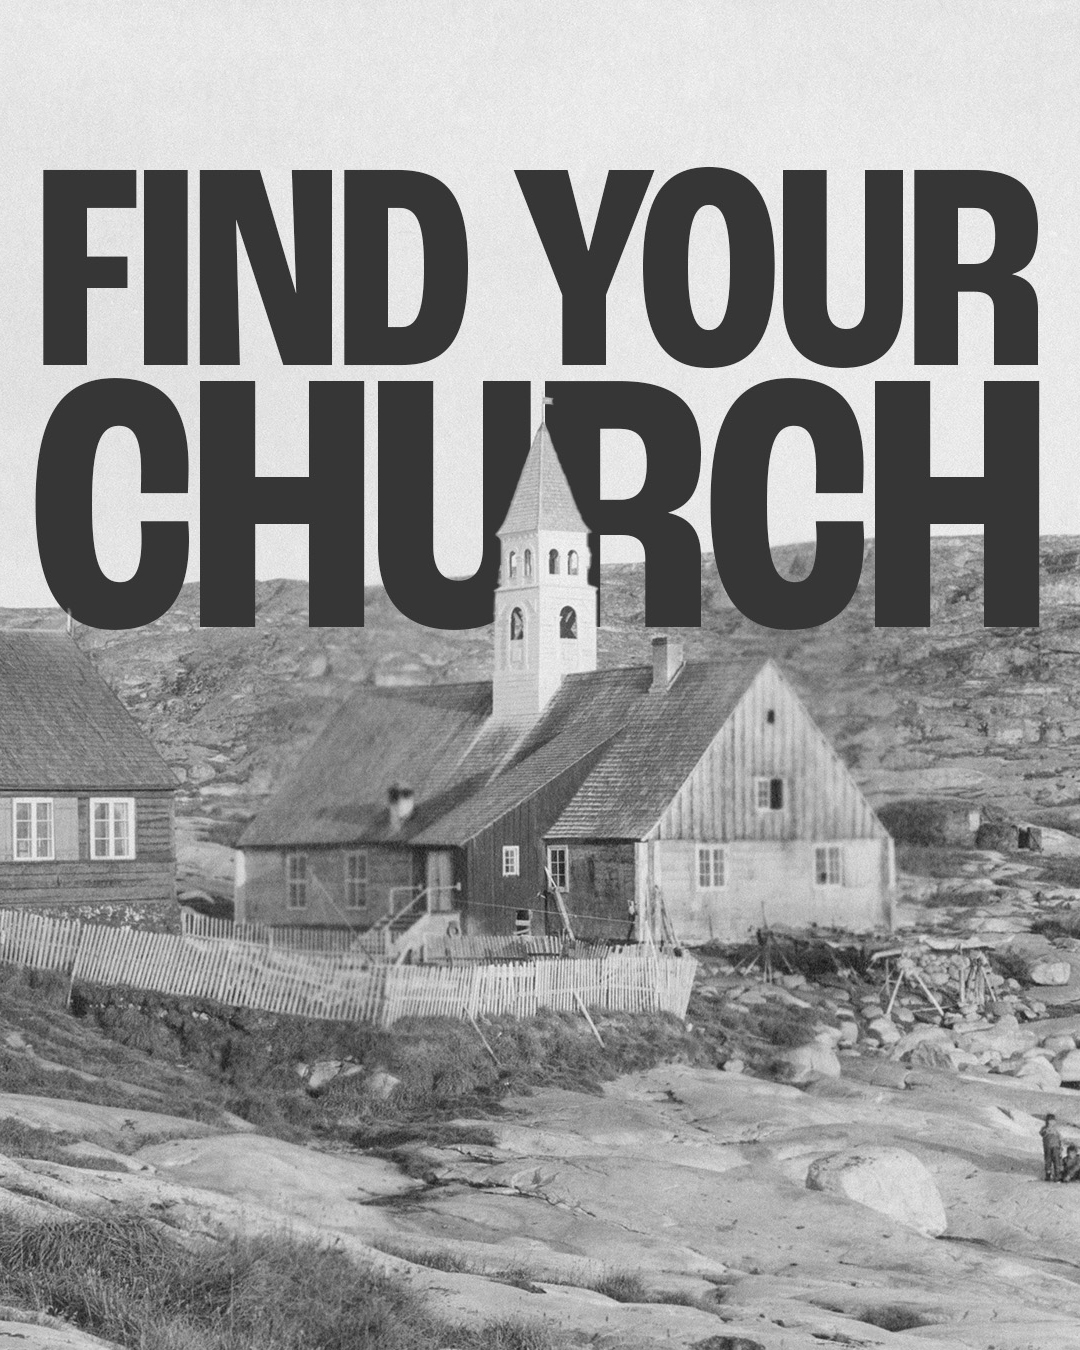 Find your church